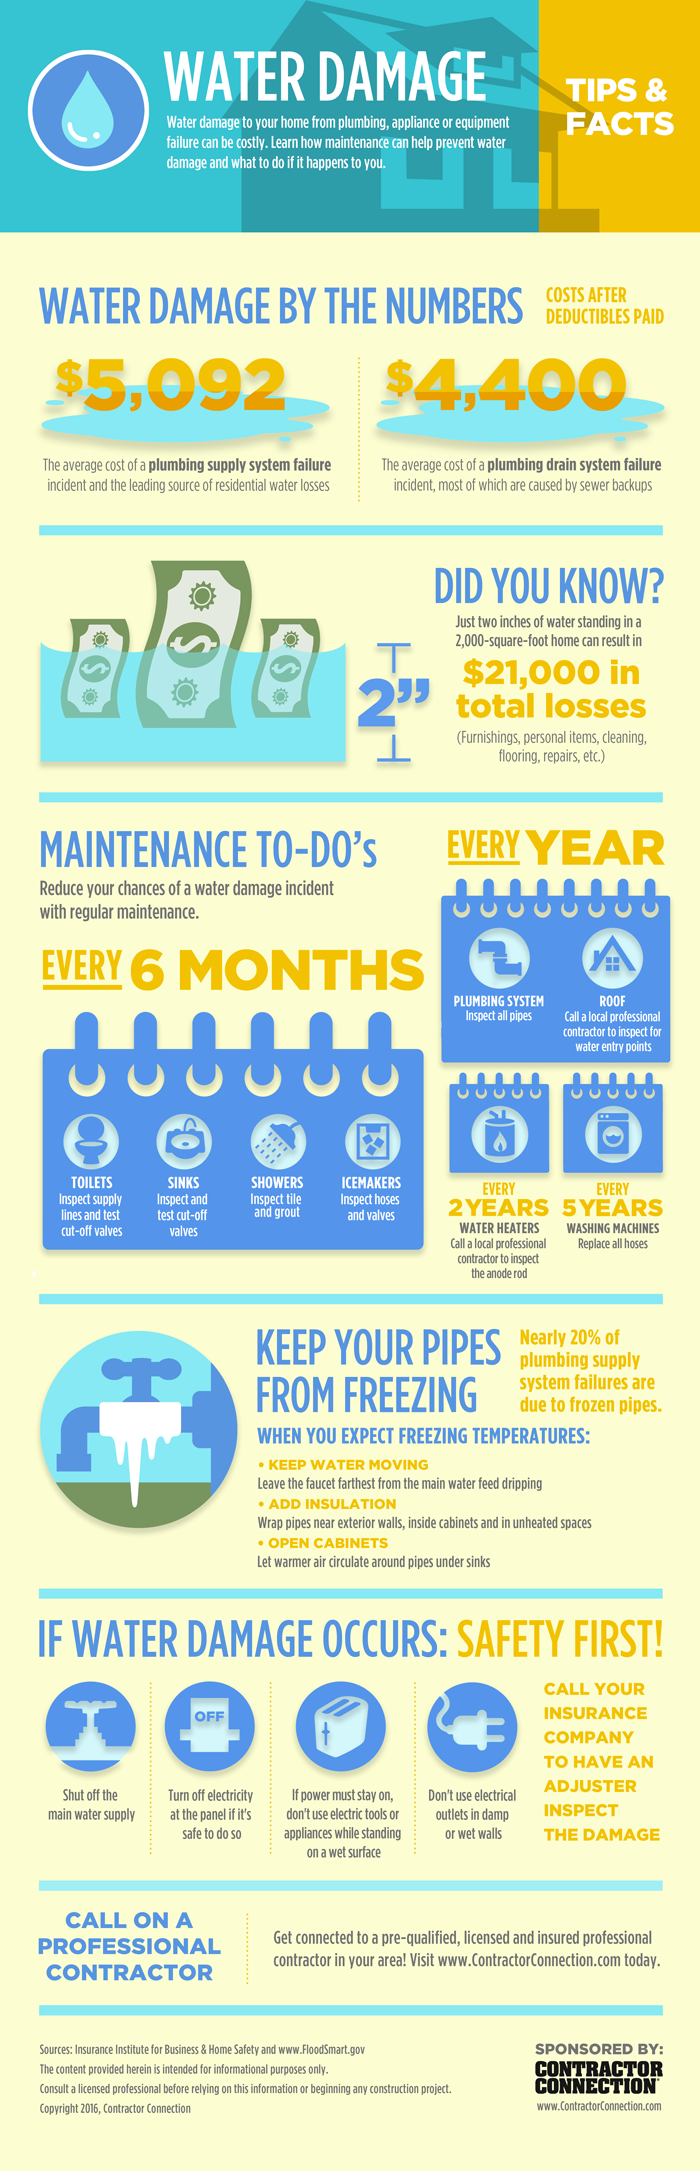 Water Damage Tips & Facts Infographic